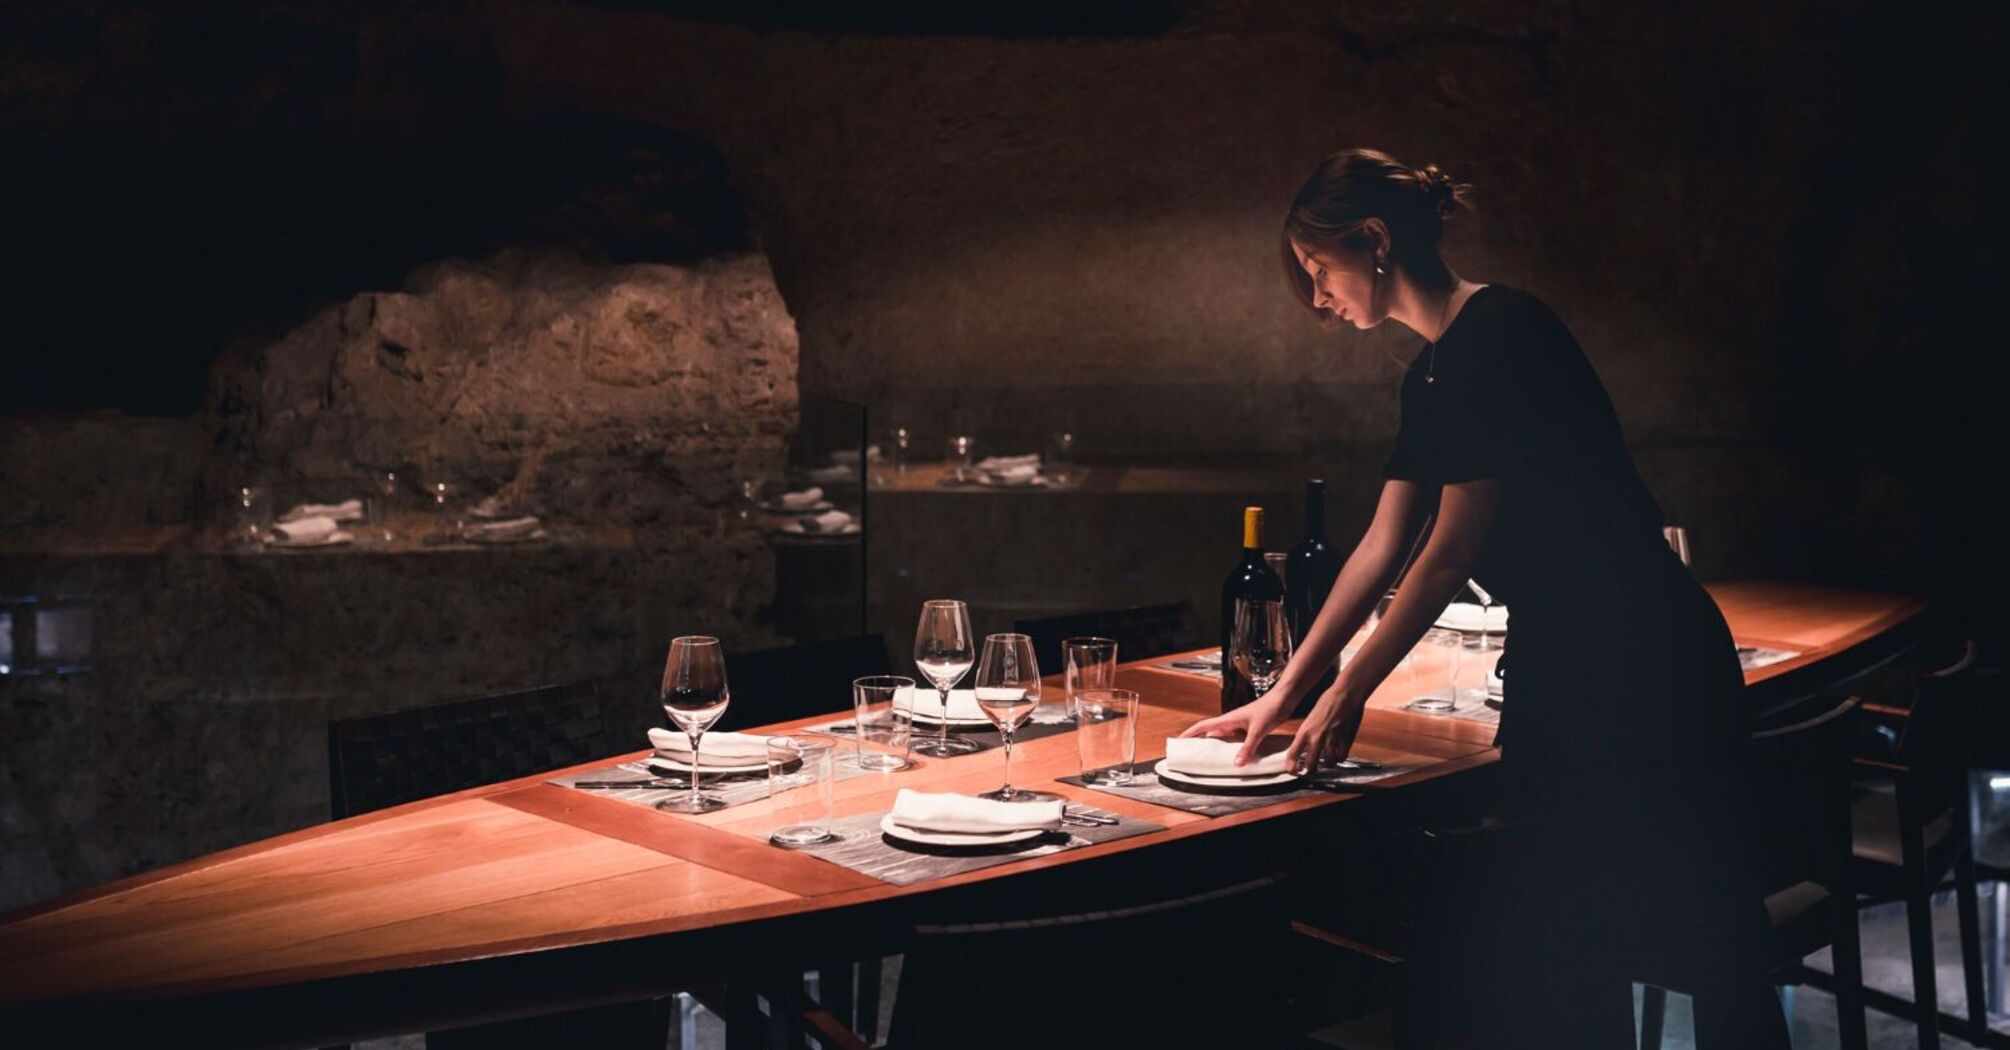 Dinner in complete silence: the most unusual rules of restaurants in the world that surprise visitors